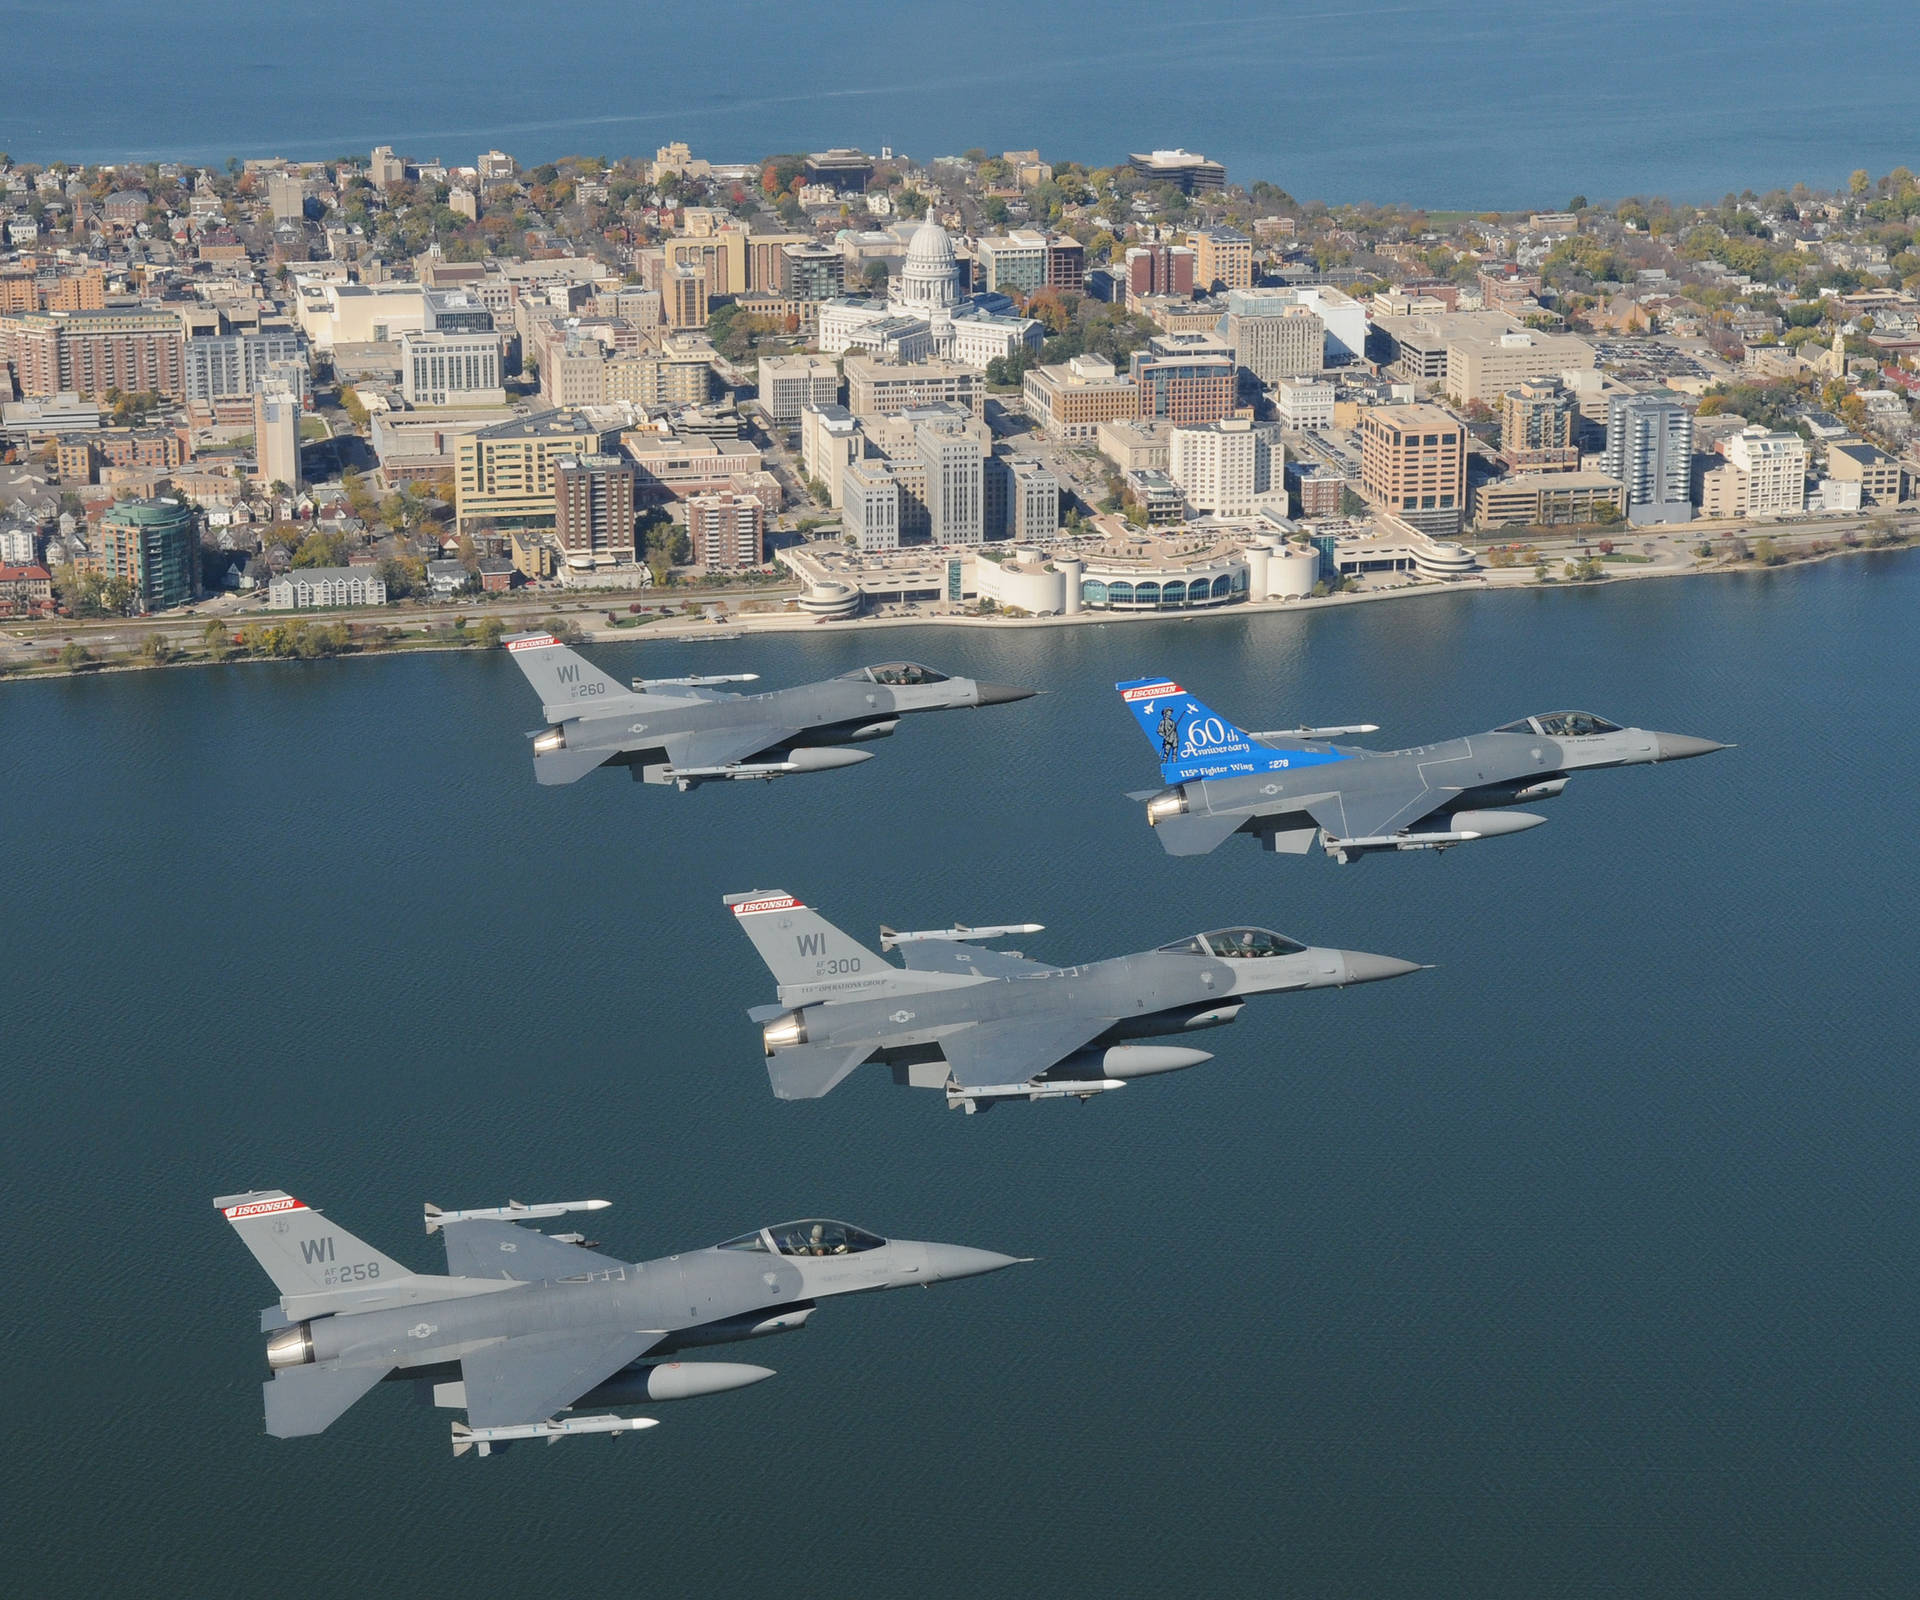 The Wisconsin Air National Guard Flying In Madison Background